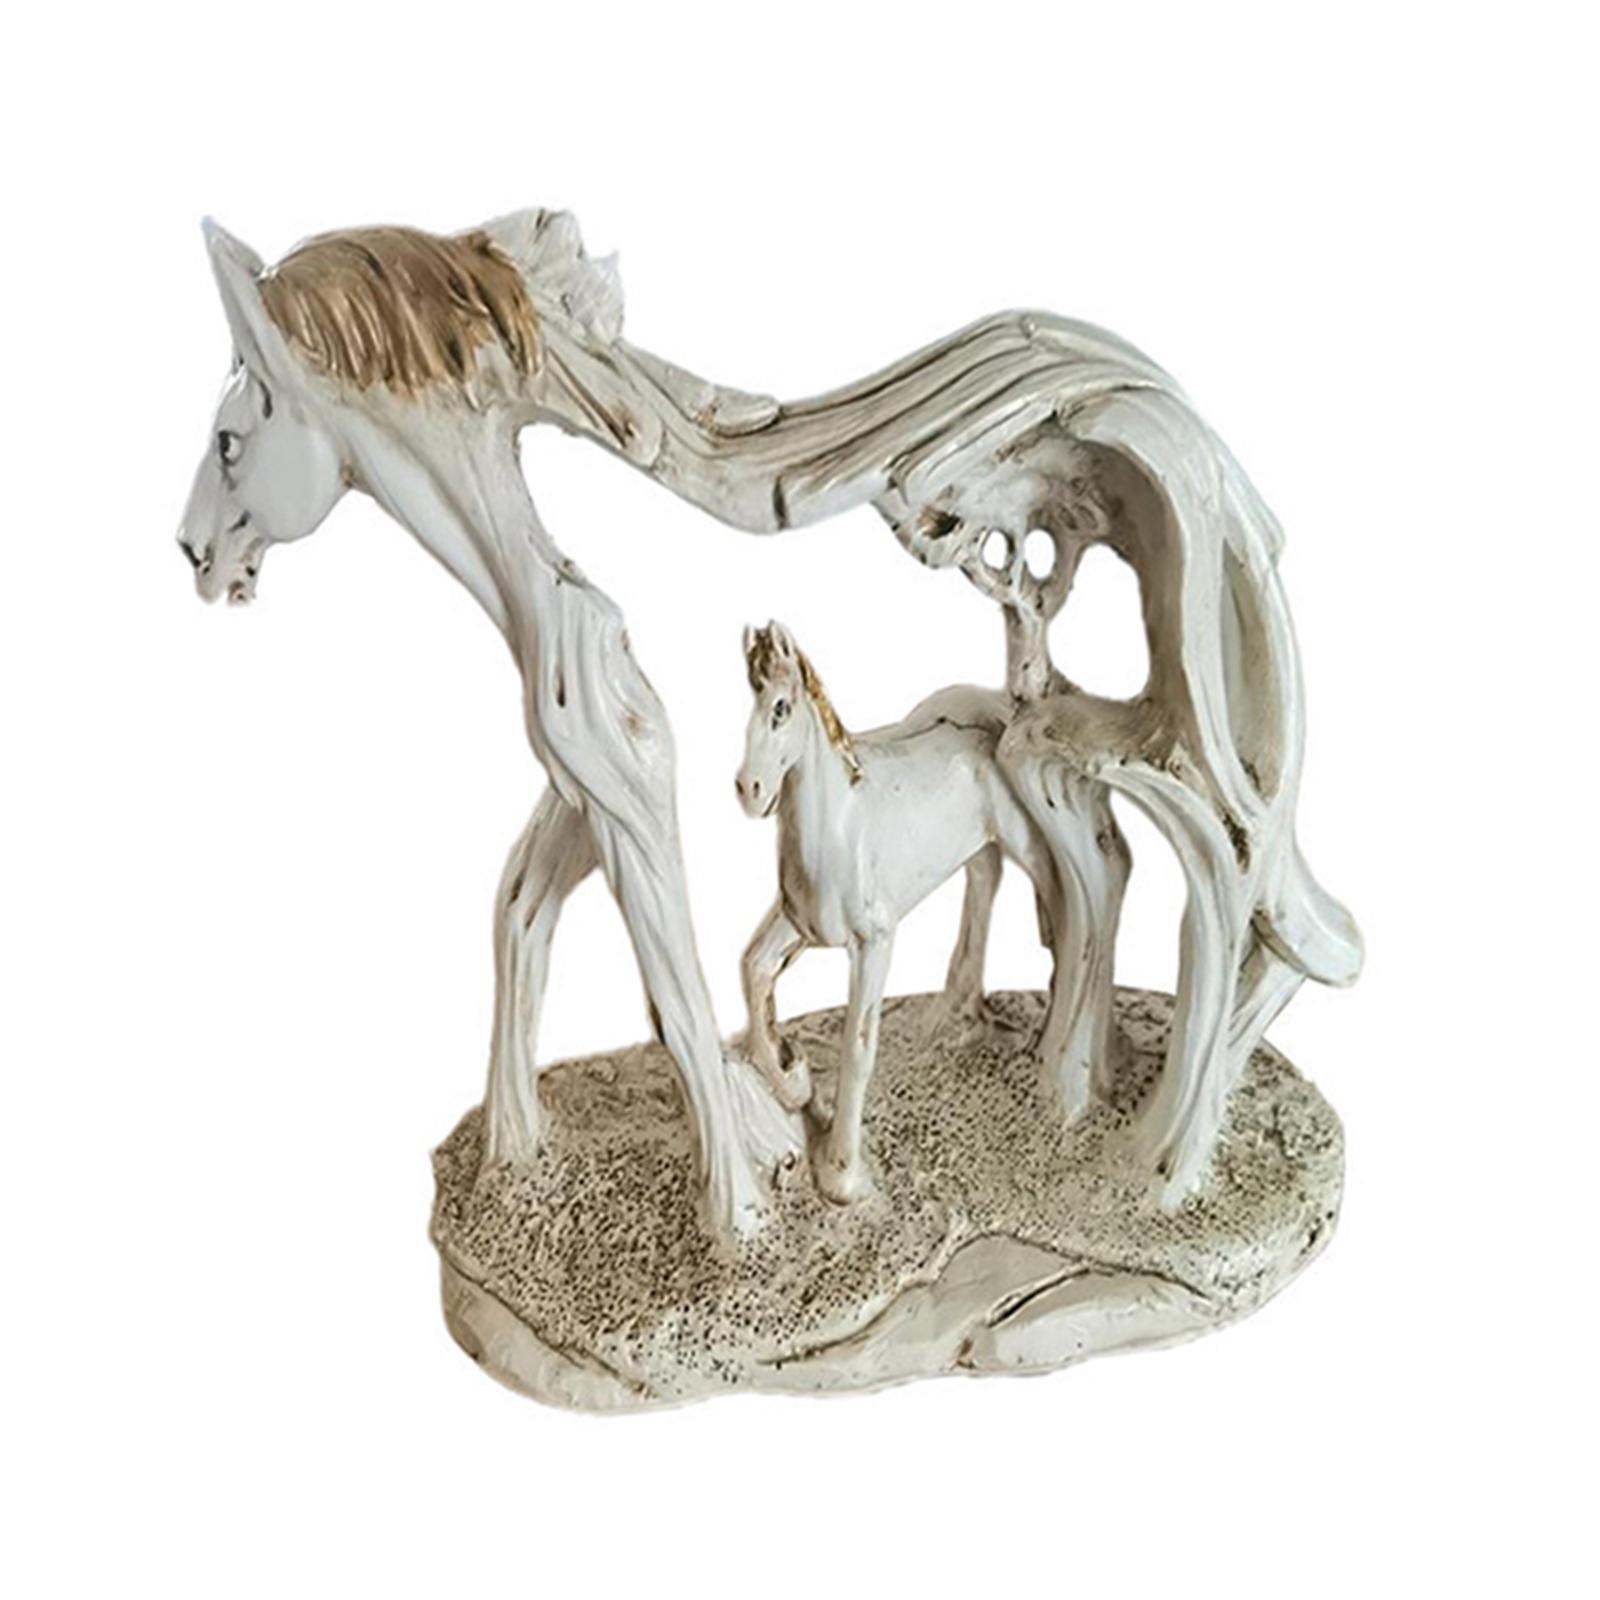 Resin Horse Statue Horse Sculpture Figurine for Home Cabinet Decor